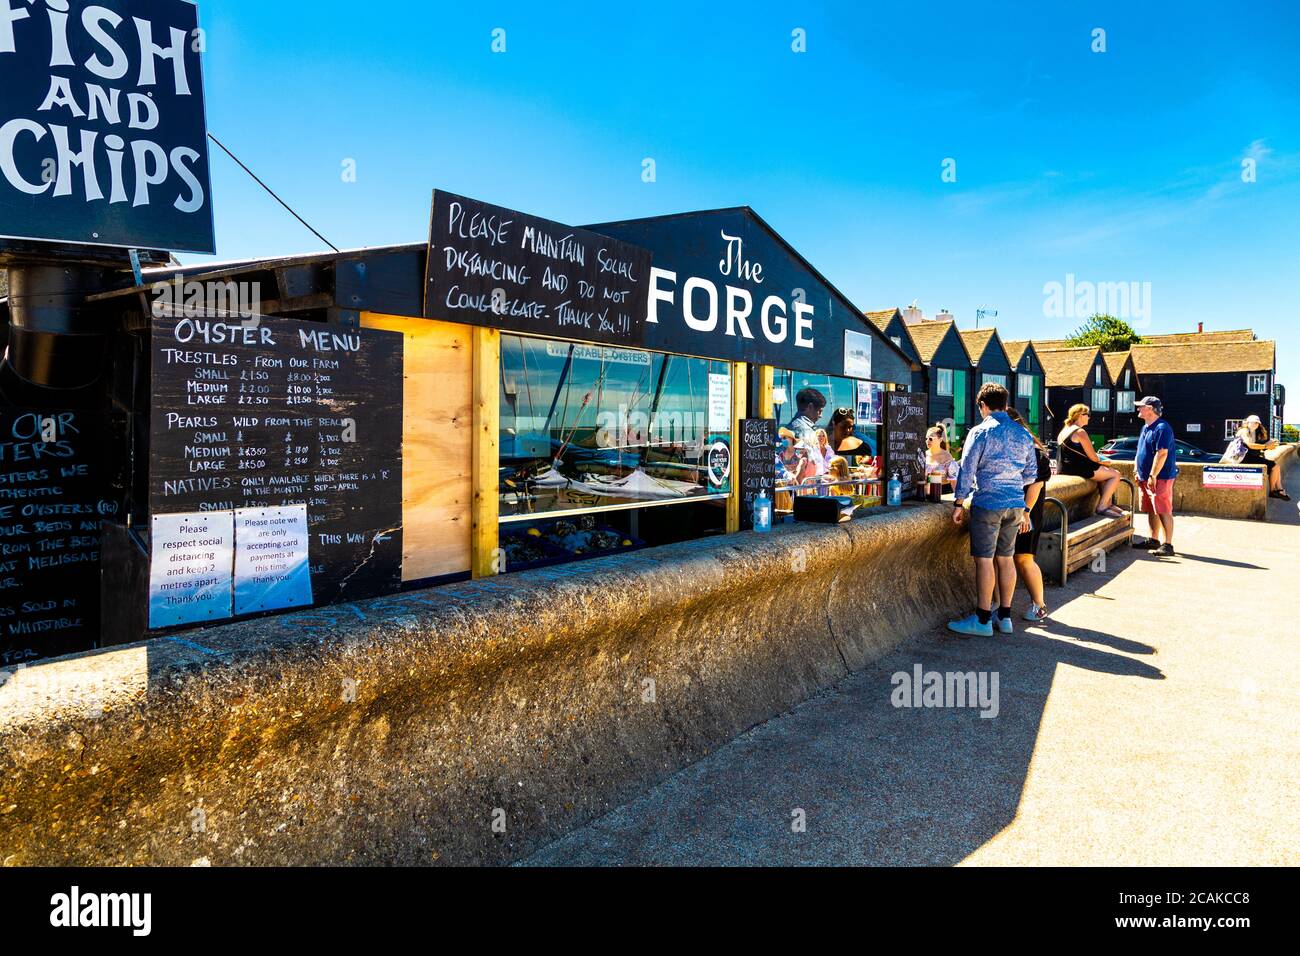 Seaside oyster shack The Forge in Whitstable, Kent, UK Stock Photo